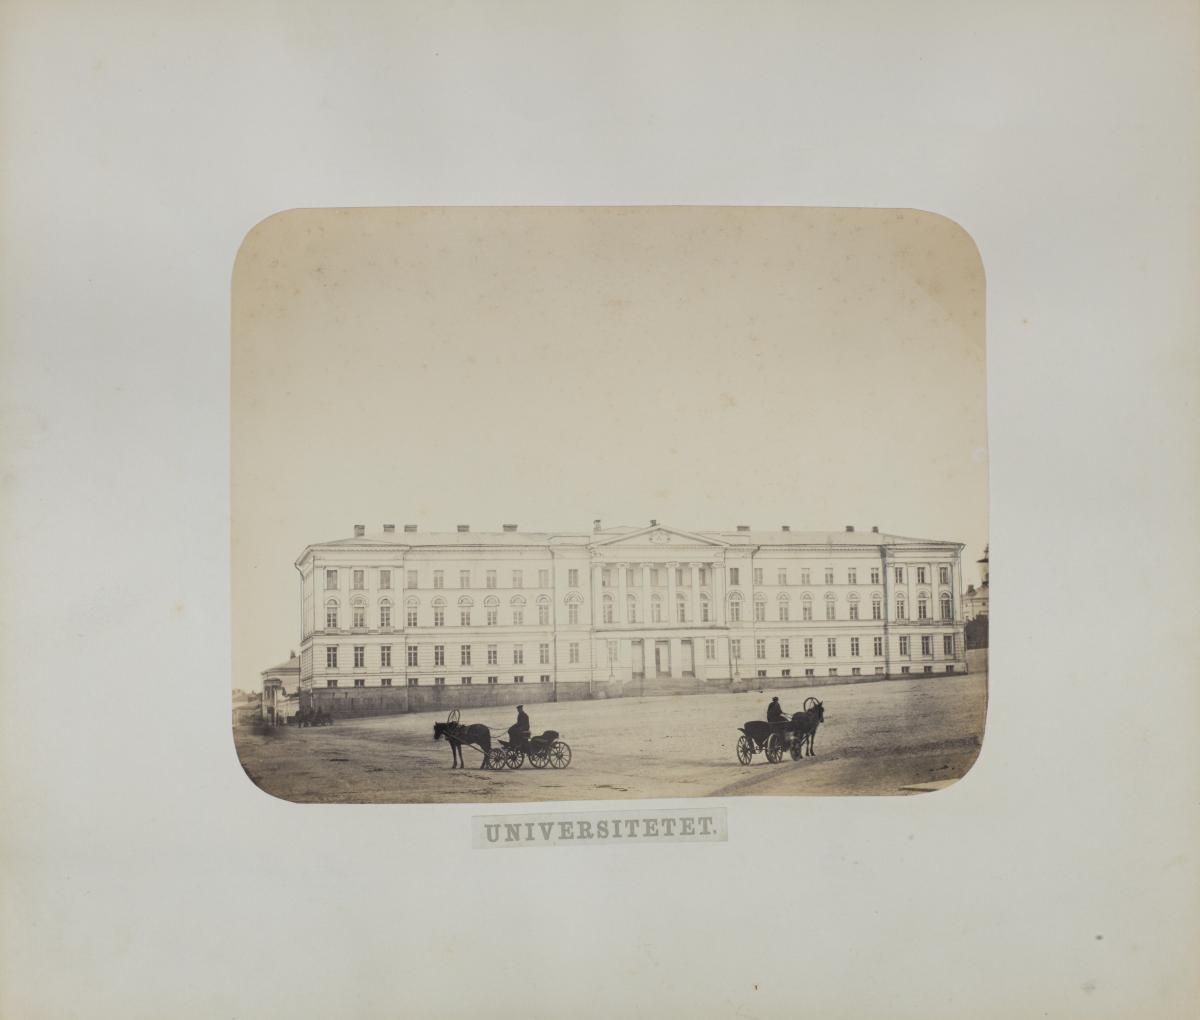 The Alexander University in the 1860s, with original windows in the building, and hired drivers in the foreground. Photo: Helsinki City Museum / Carl Adolf Hårdh